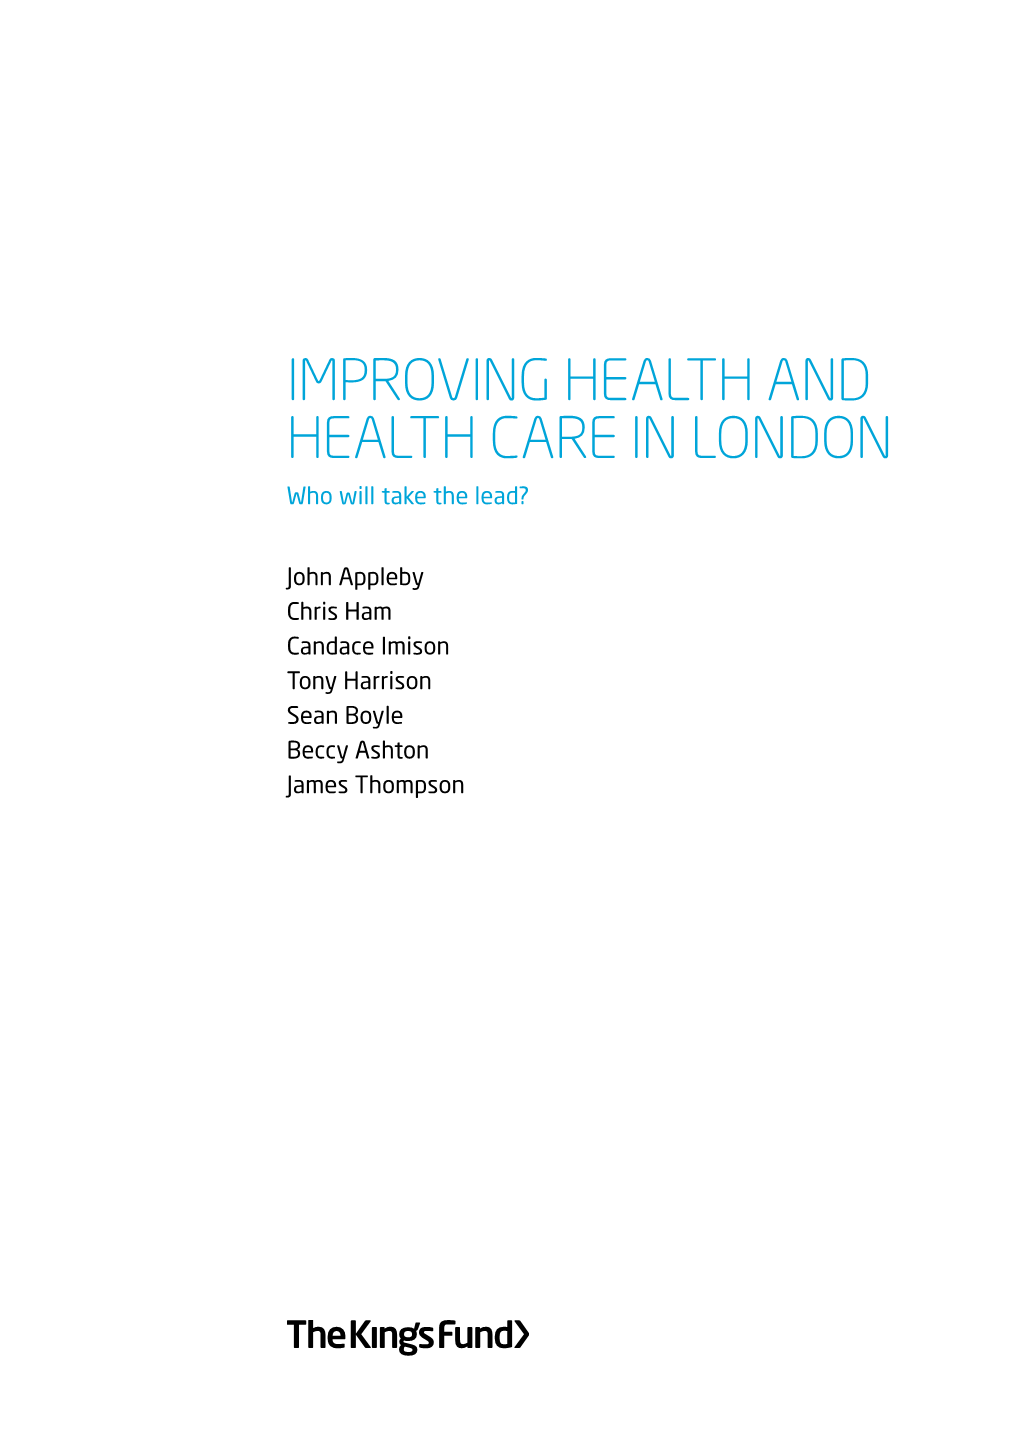 Improving Health and Healthcare in London